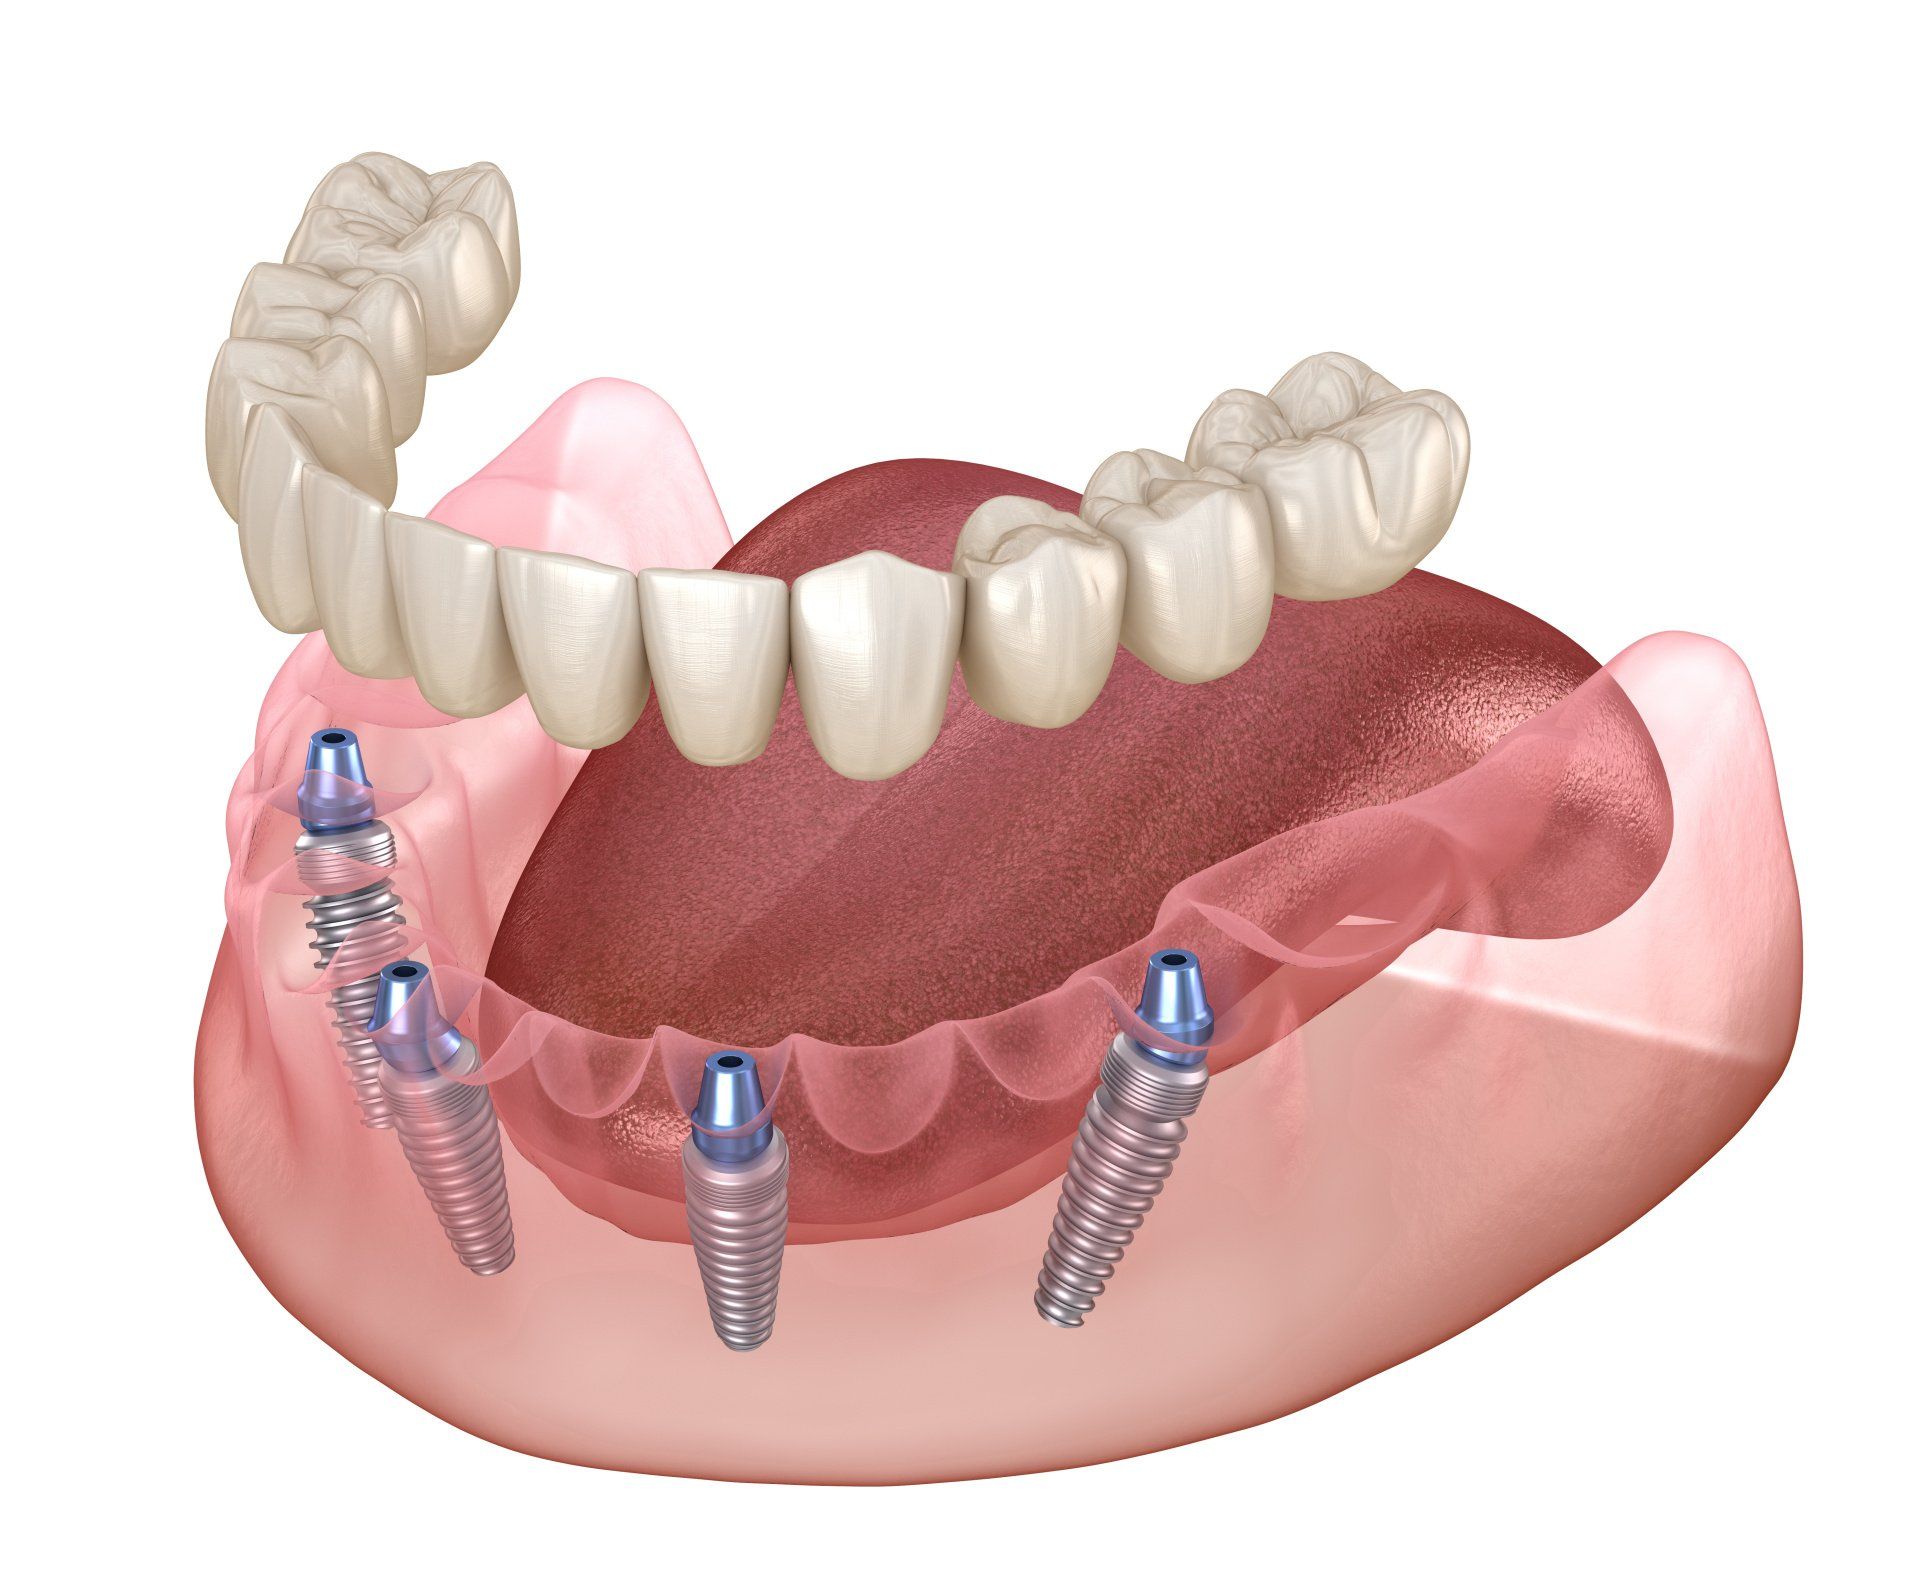 Full Arch Implant Solutions